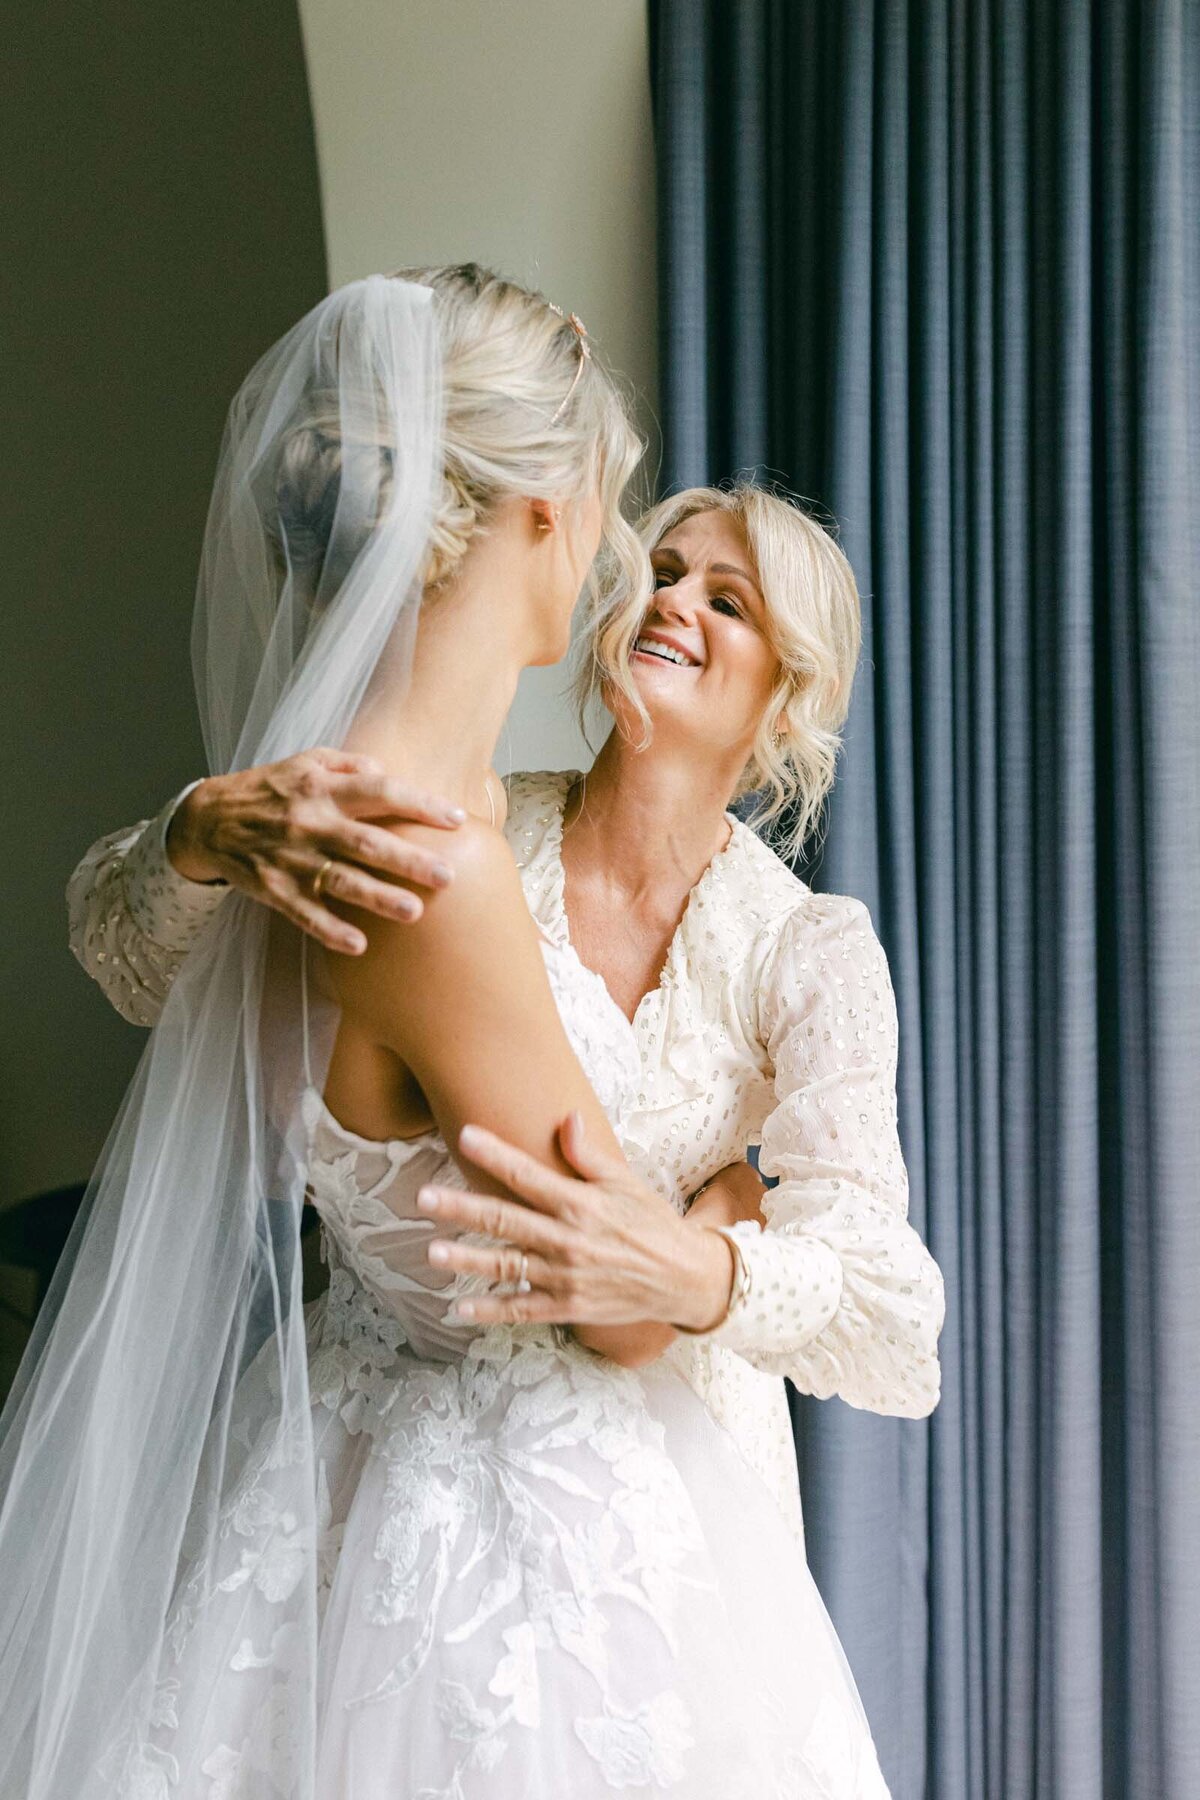 A tender moment between a bride and her mother